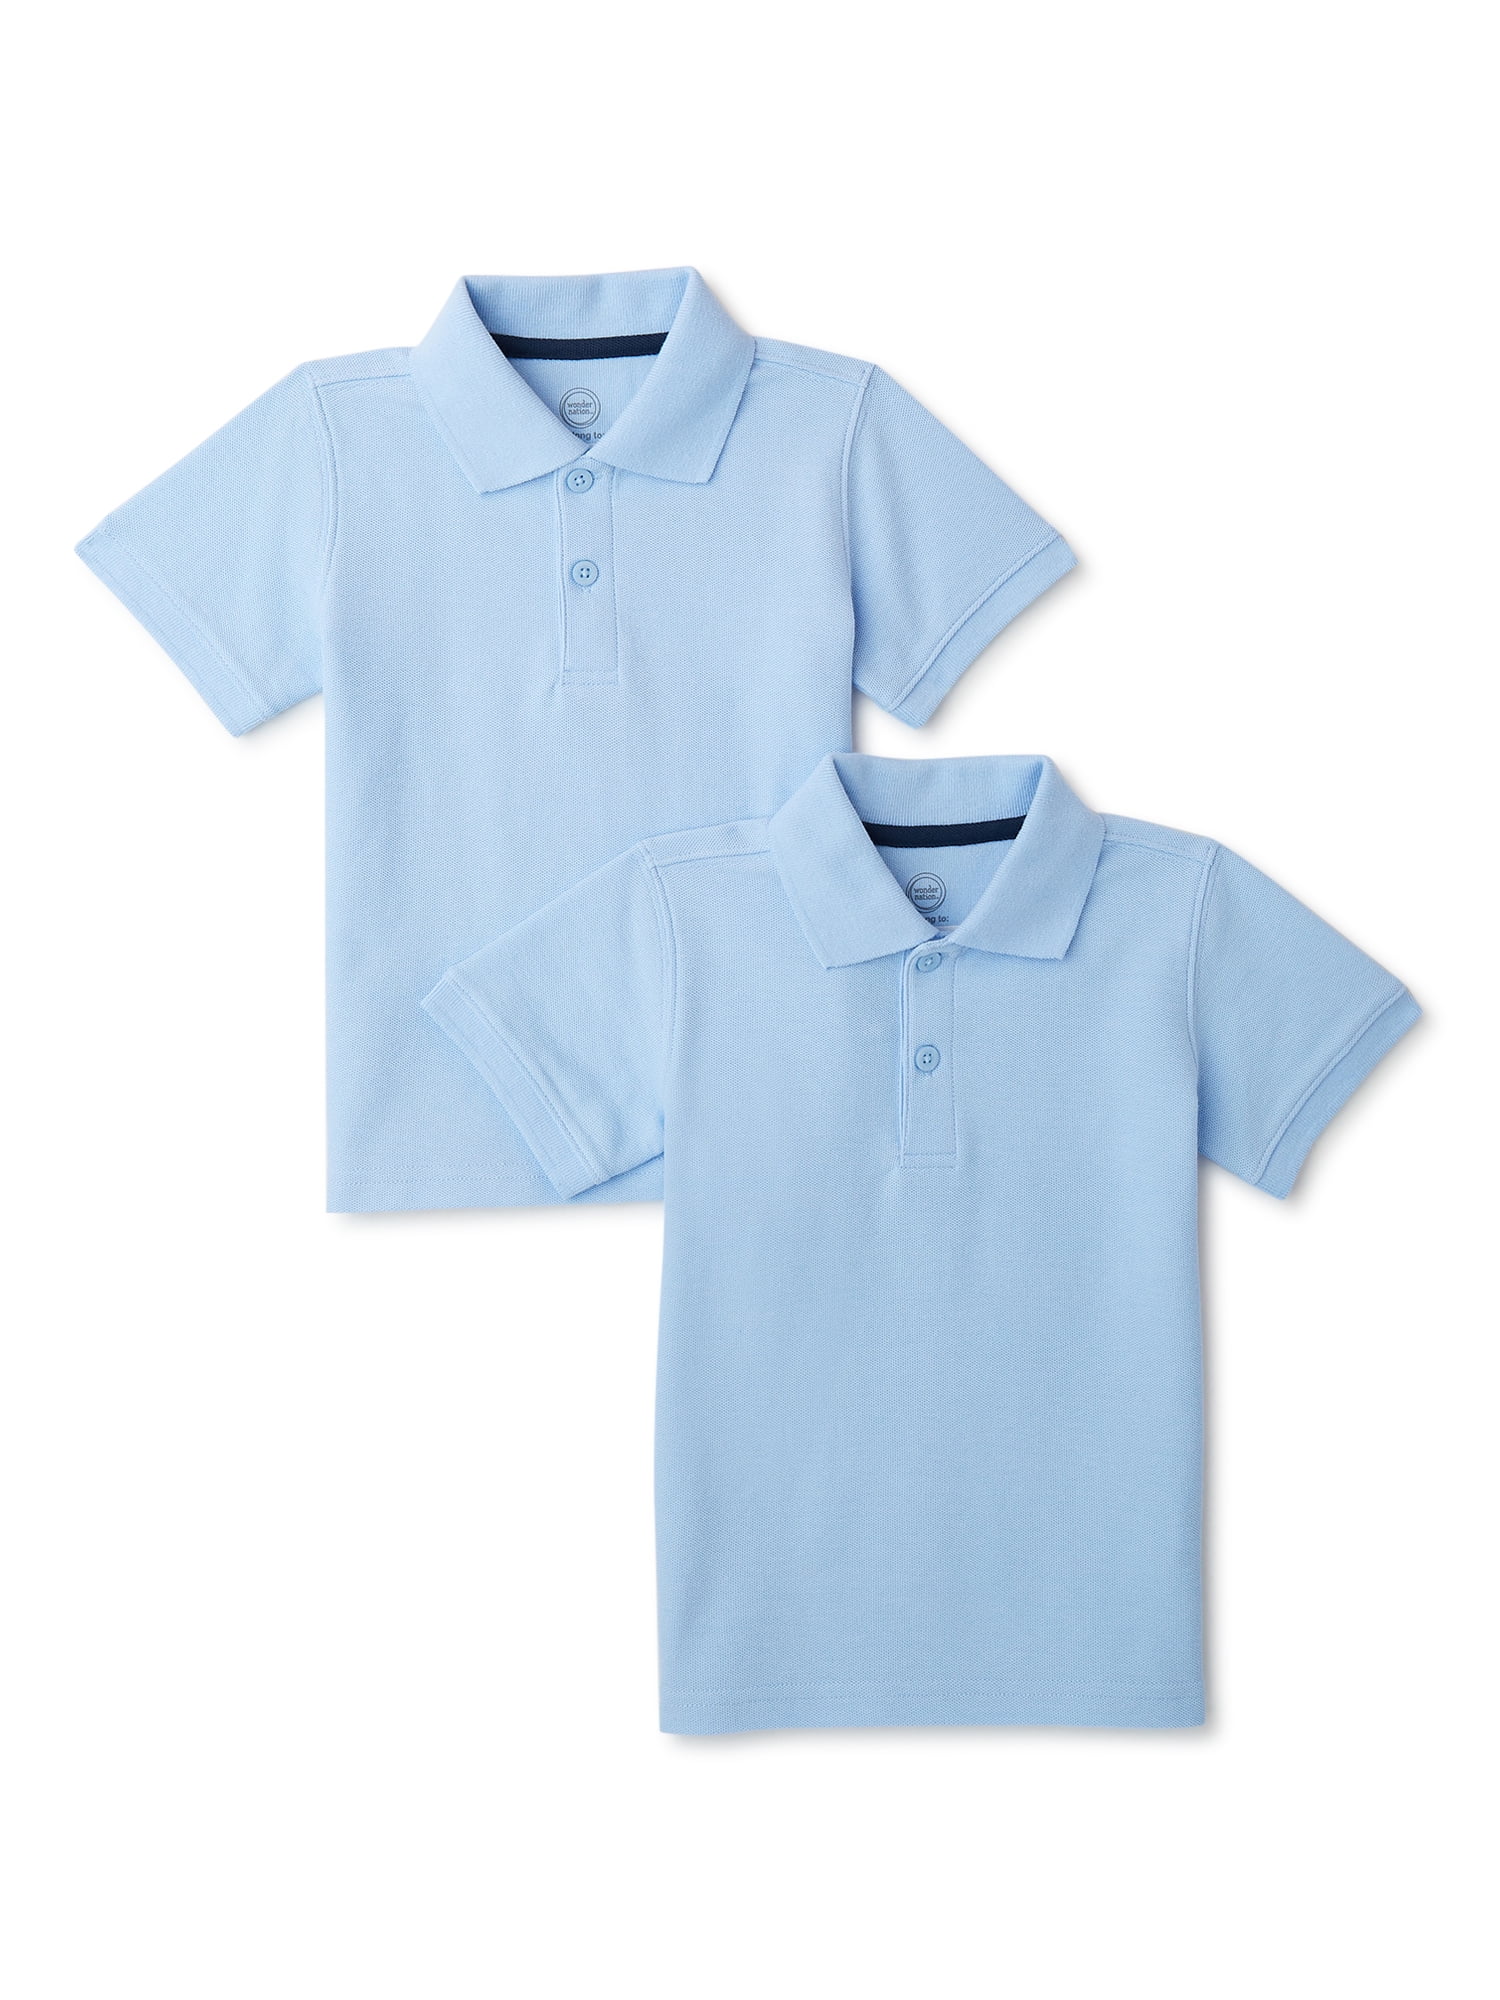 Multipacks Essentials Boys and Toddlers' Uniform Short-Sleeve Pique Polo Shirts 